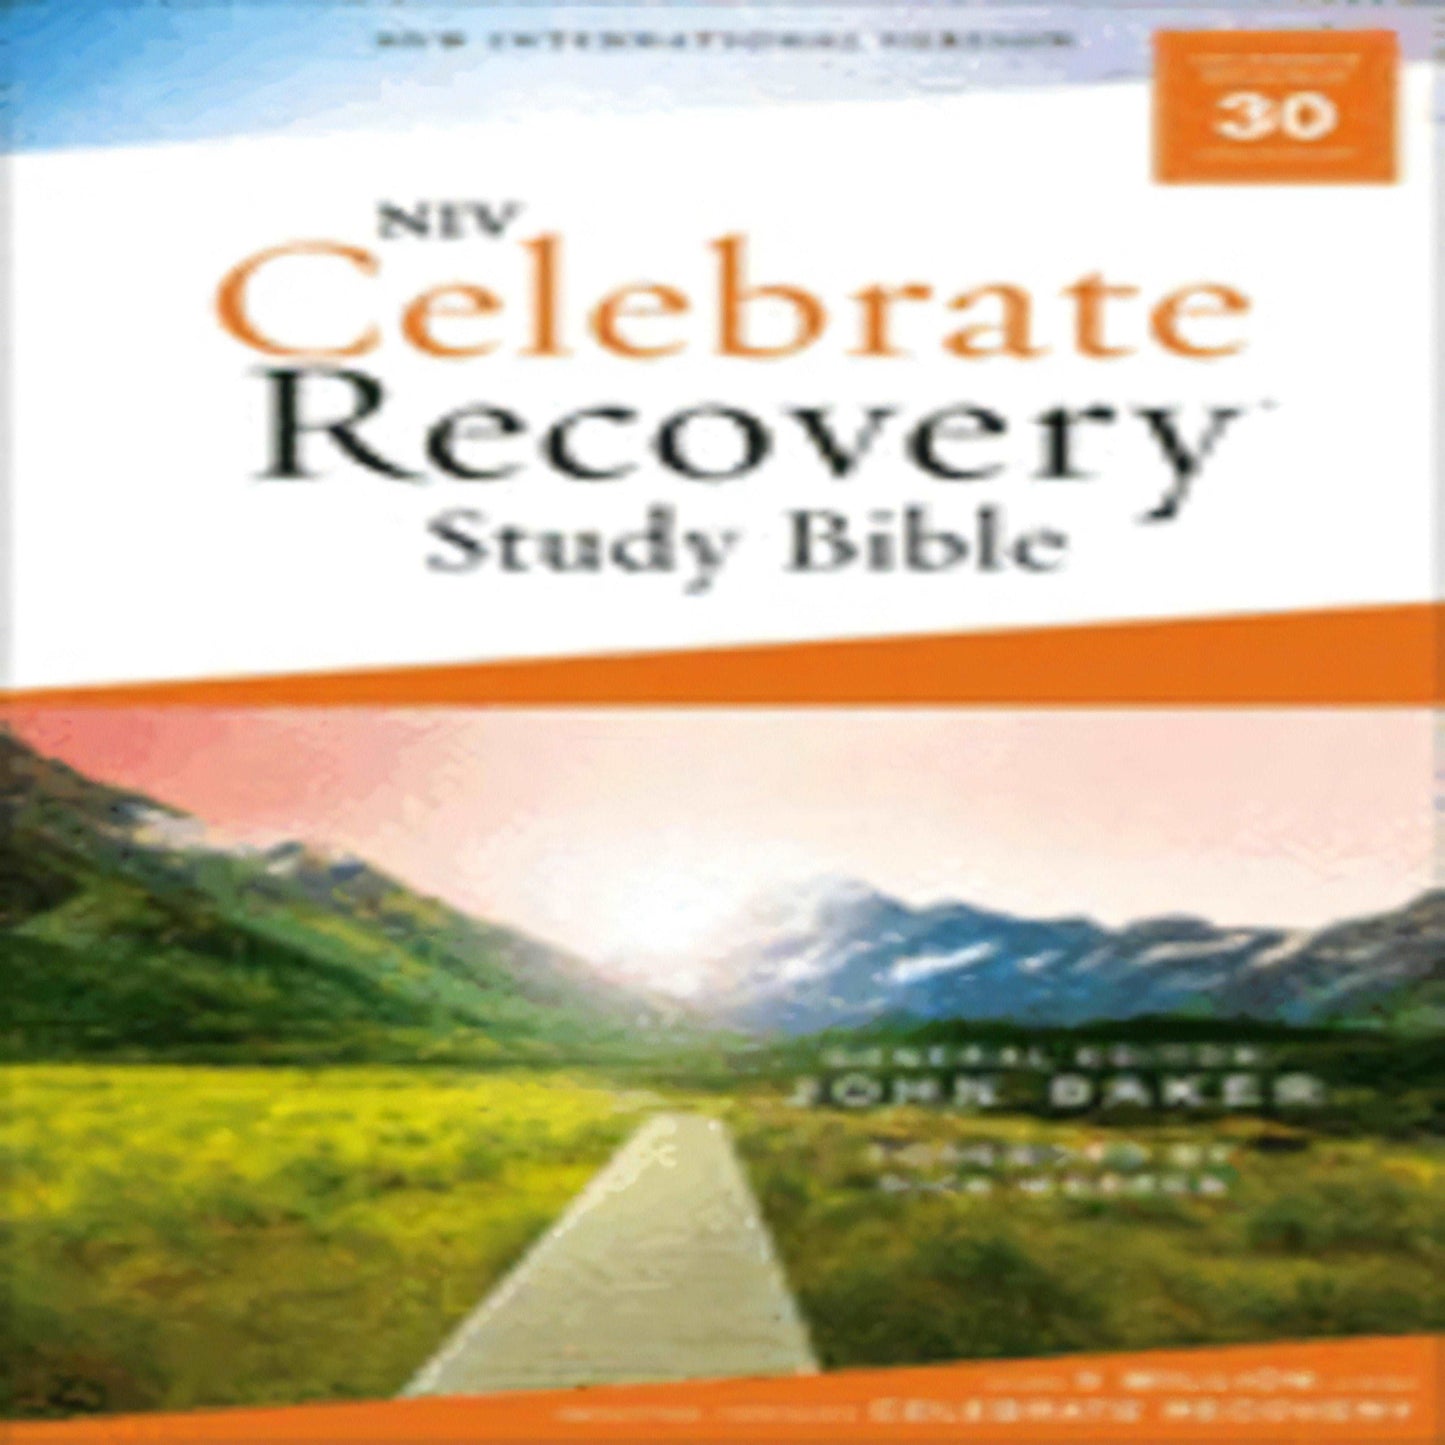 TEXTBOOK NIV, Celebrate Recovery Study Bible, Paperback, Comfort Print (Celebrate Recovery)269-032023-0310455251DPGBOOKSTORE.COM. Today's Bestsellers.